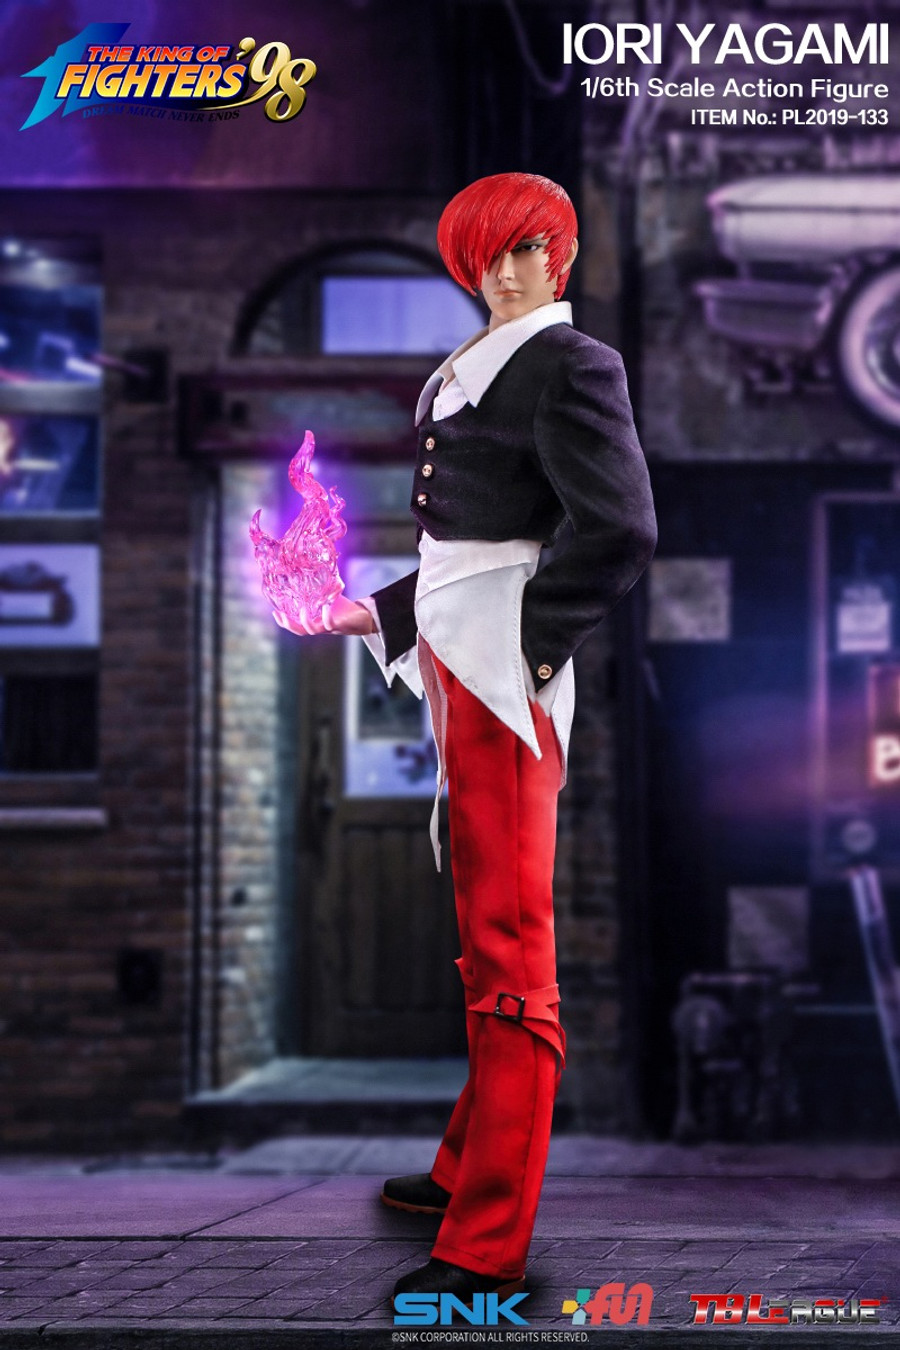 TBLeague - King of Fighters - Iori Yagami